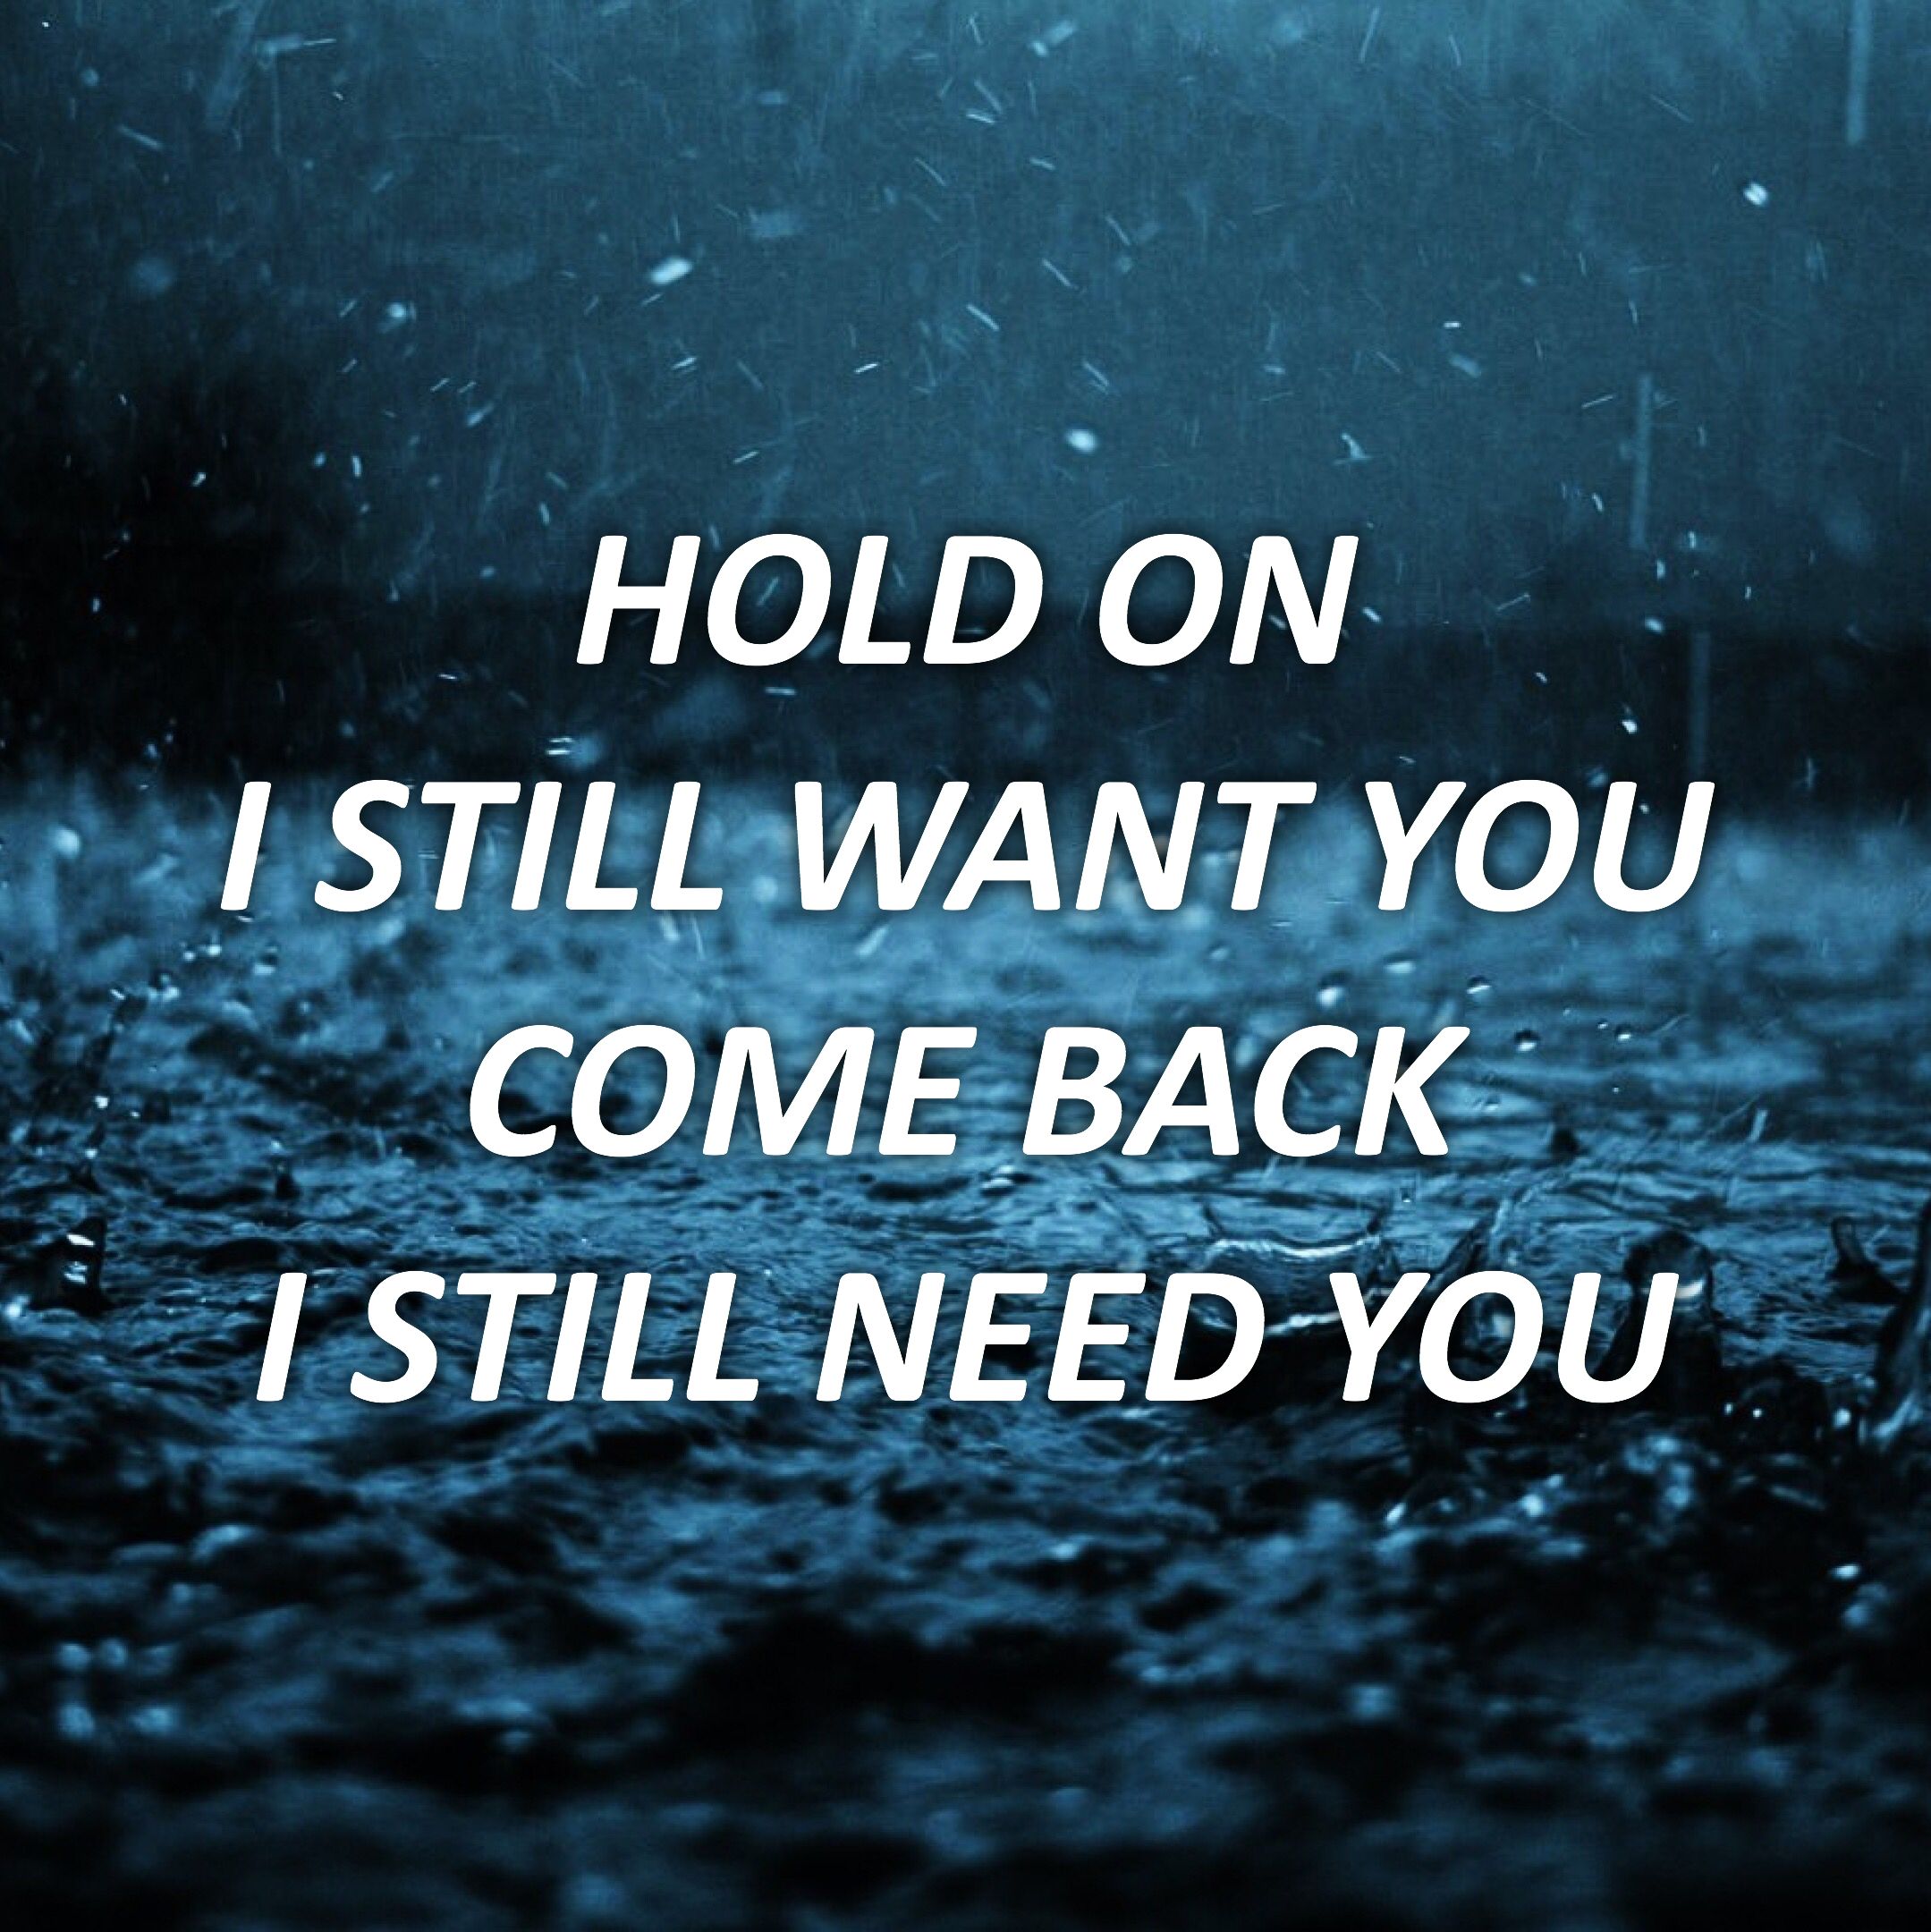 Chord Overstreet - Hold On